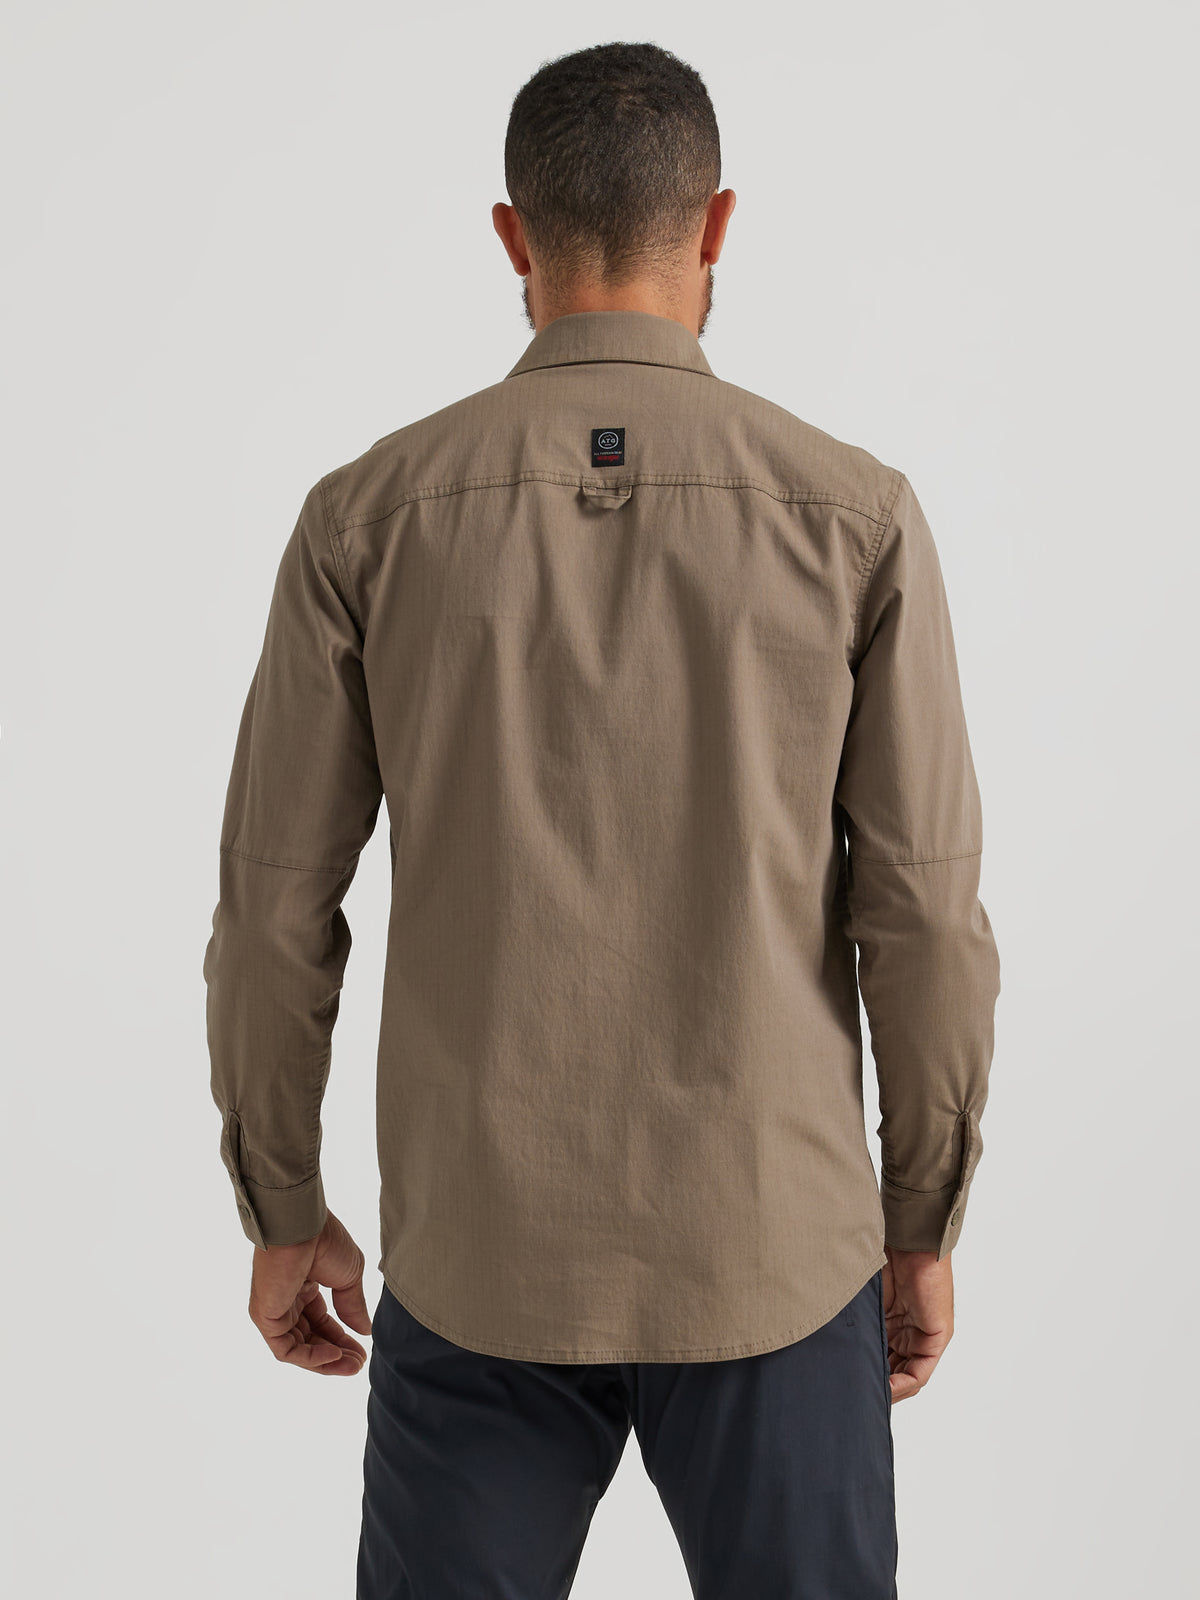 LS Rugged Utility Shirt in Bungee Cord